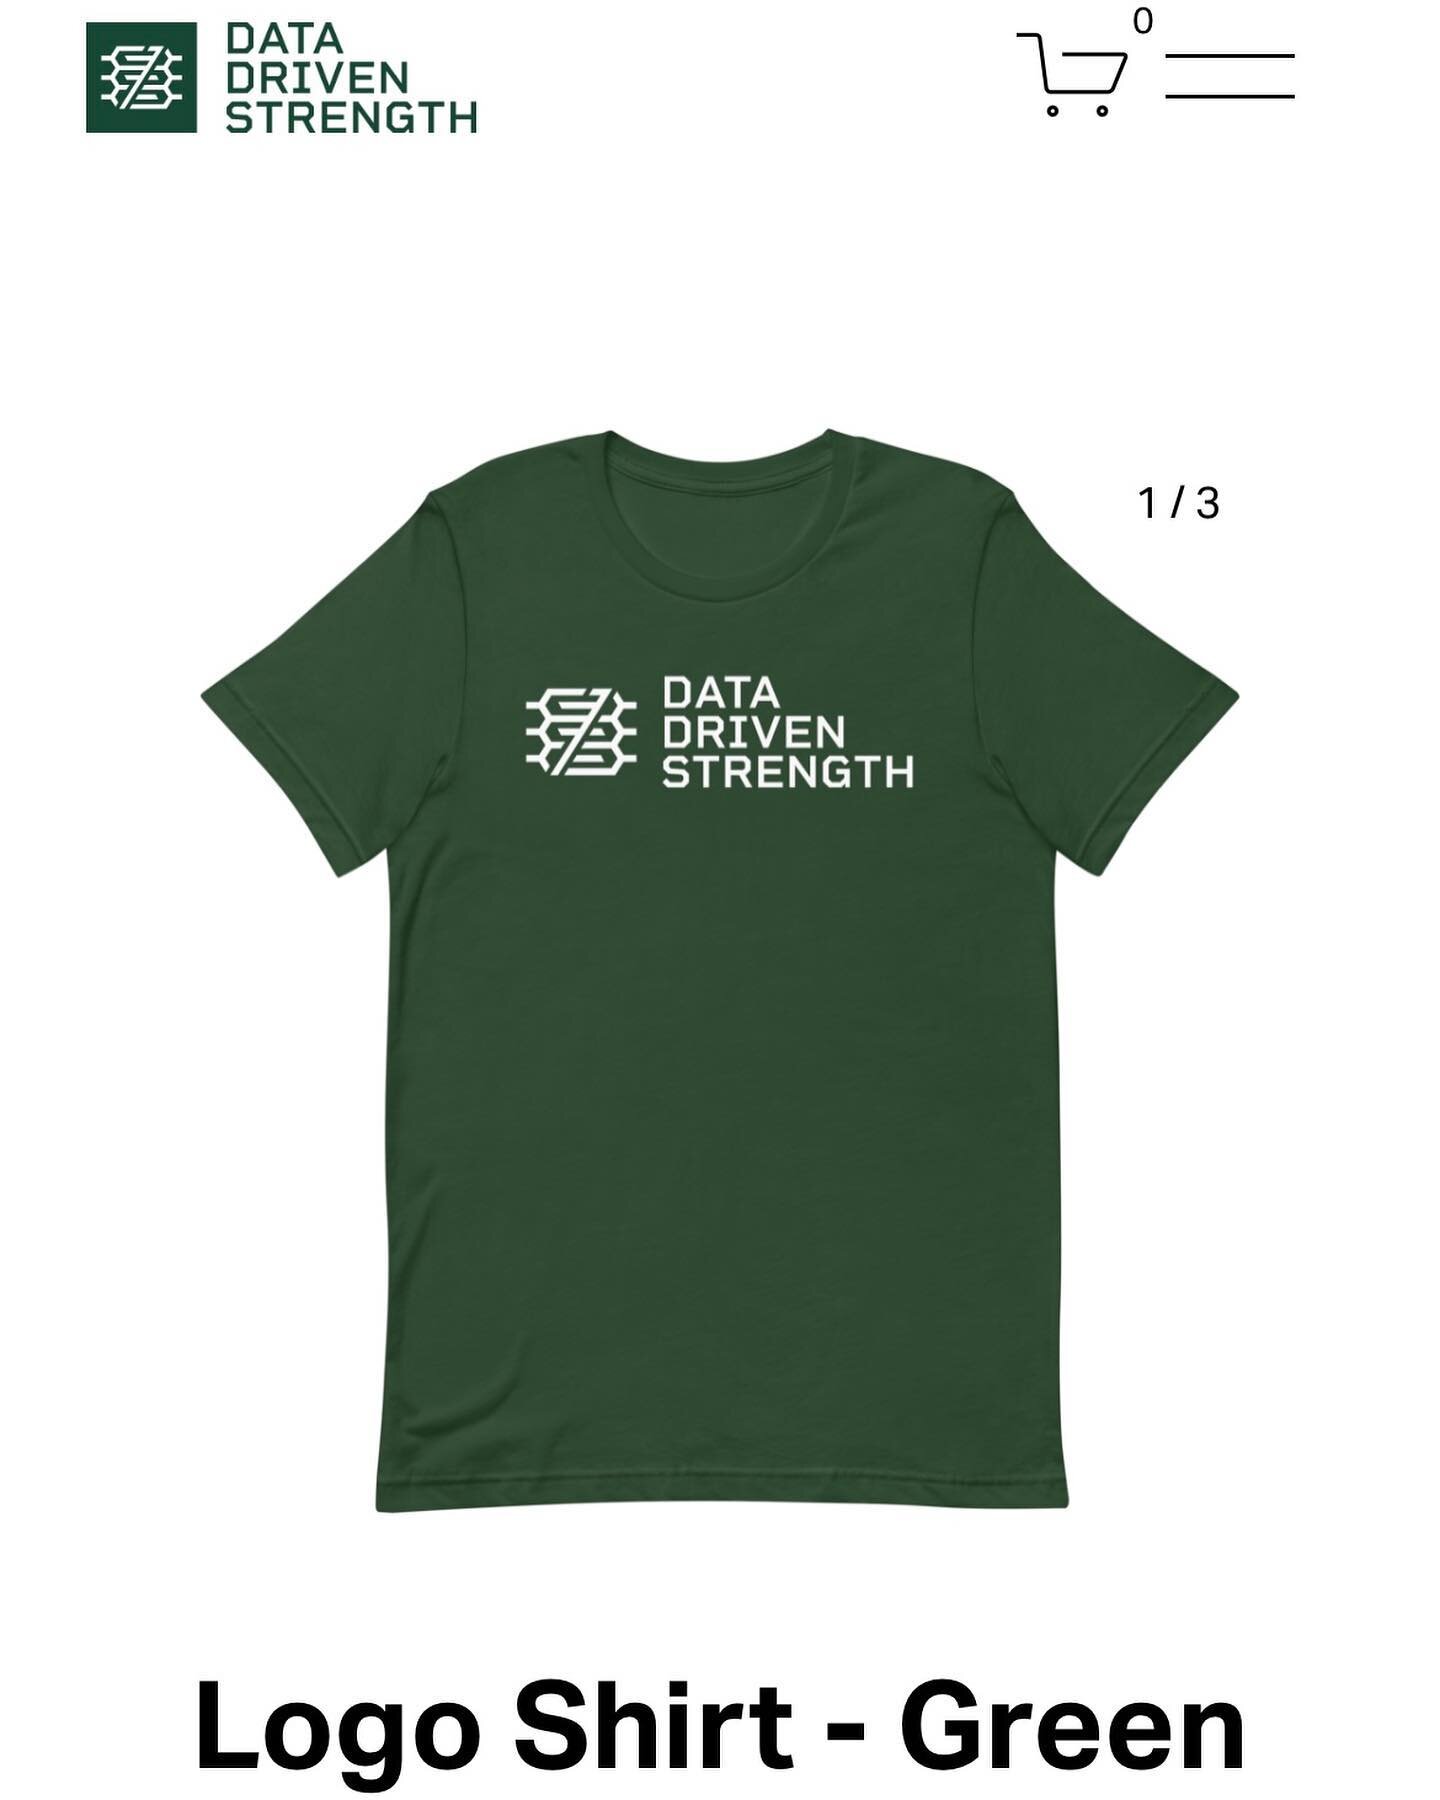 Shirts are now available on the website! Link is in bio to check them out.

Thanks so much everyone for your support!

#DataDrivenStrength